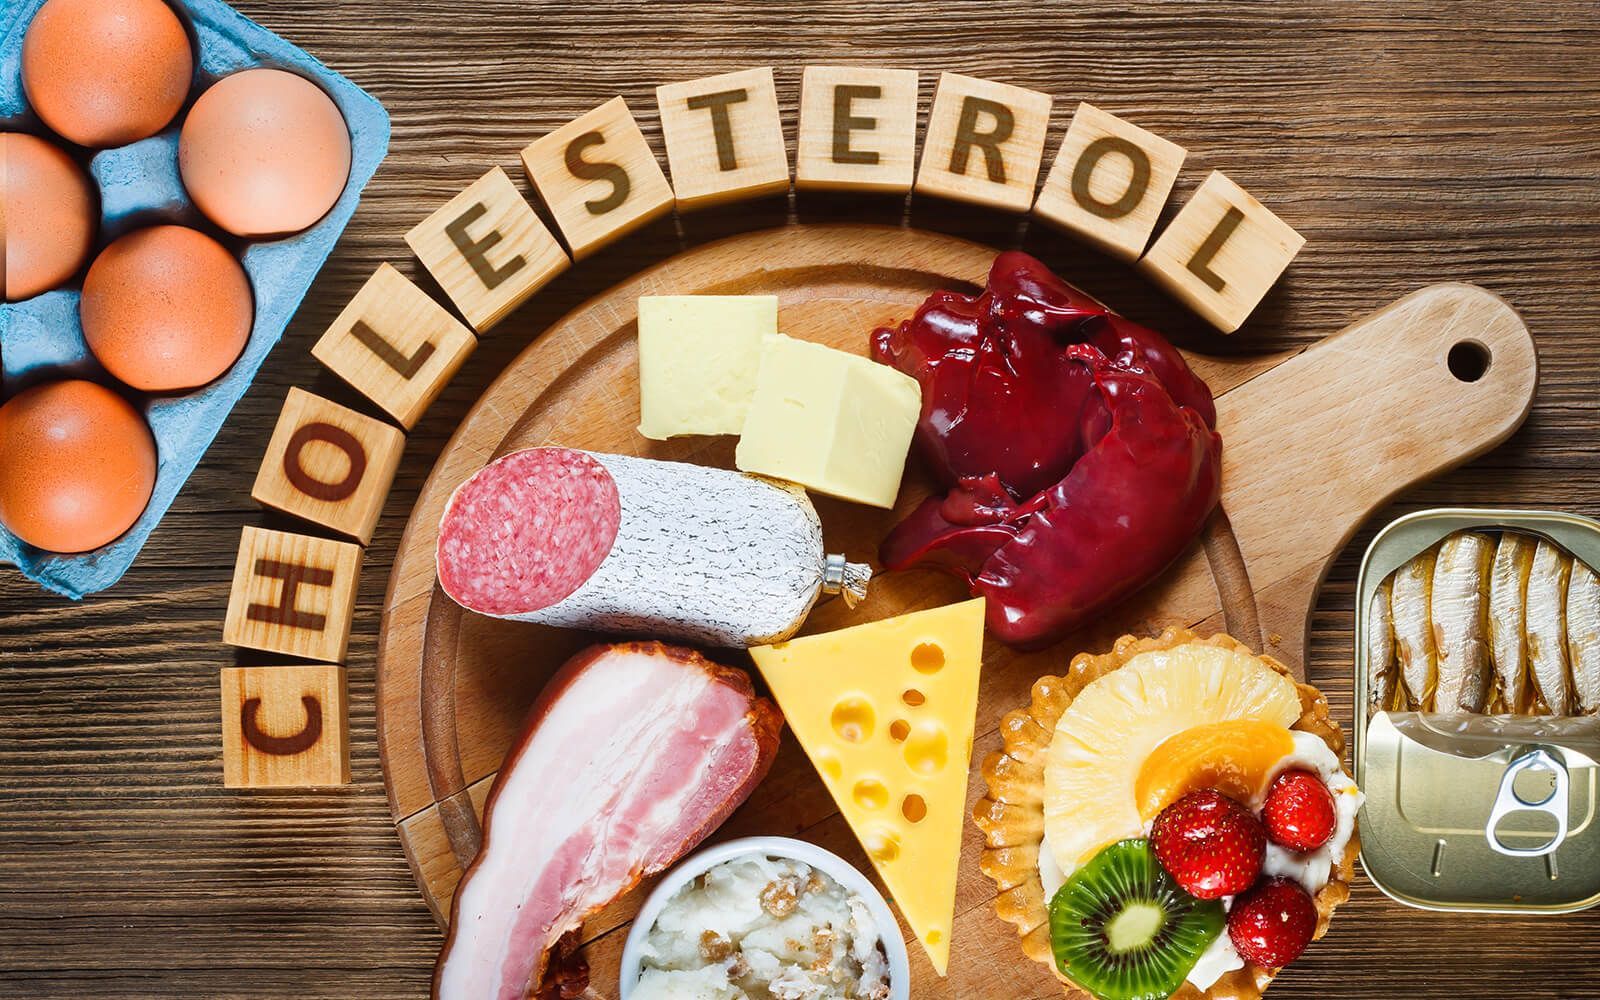 List of High-Cholesterol Foods to Avoid